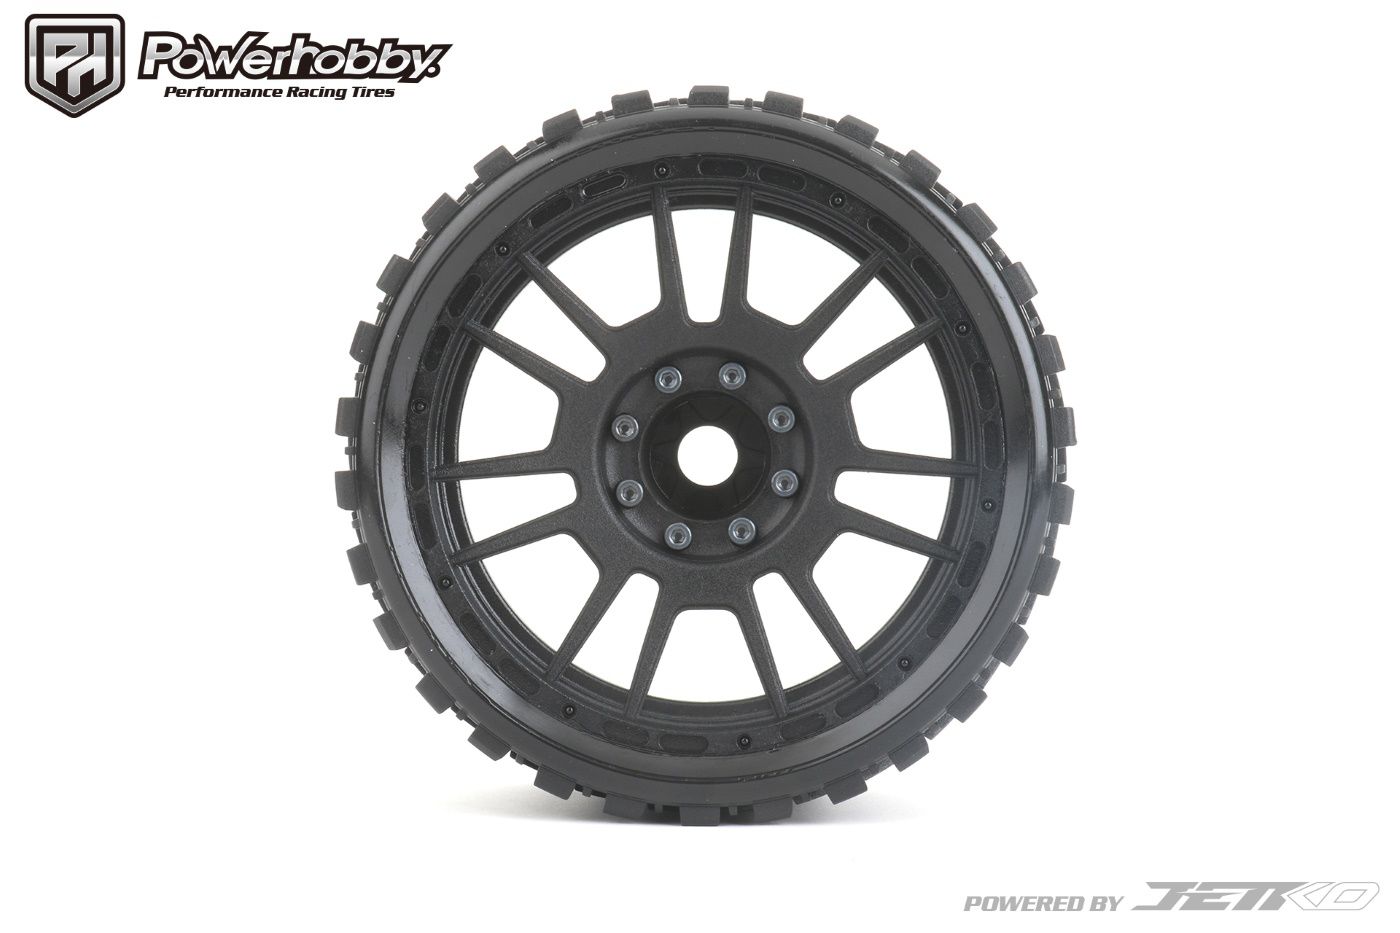 Powerhobby 1/8 MT 4.0 Prophet Belted Mounted Tires w Removable Hex Wheels (2) - PowerHobby